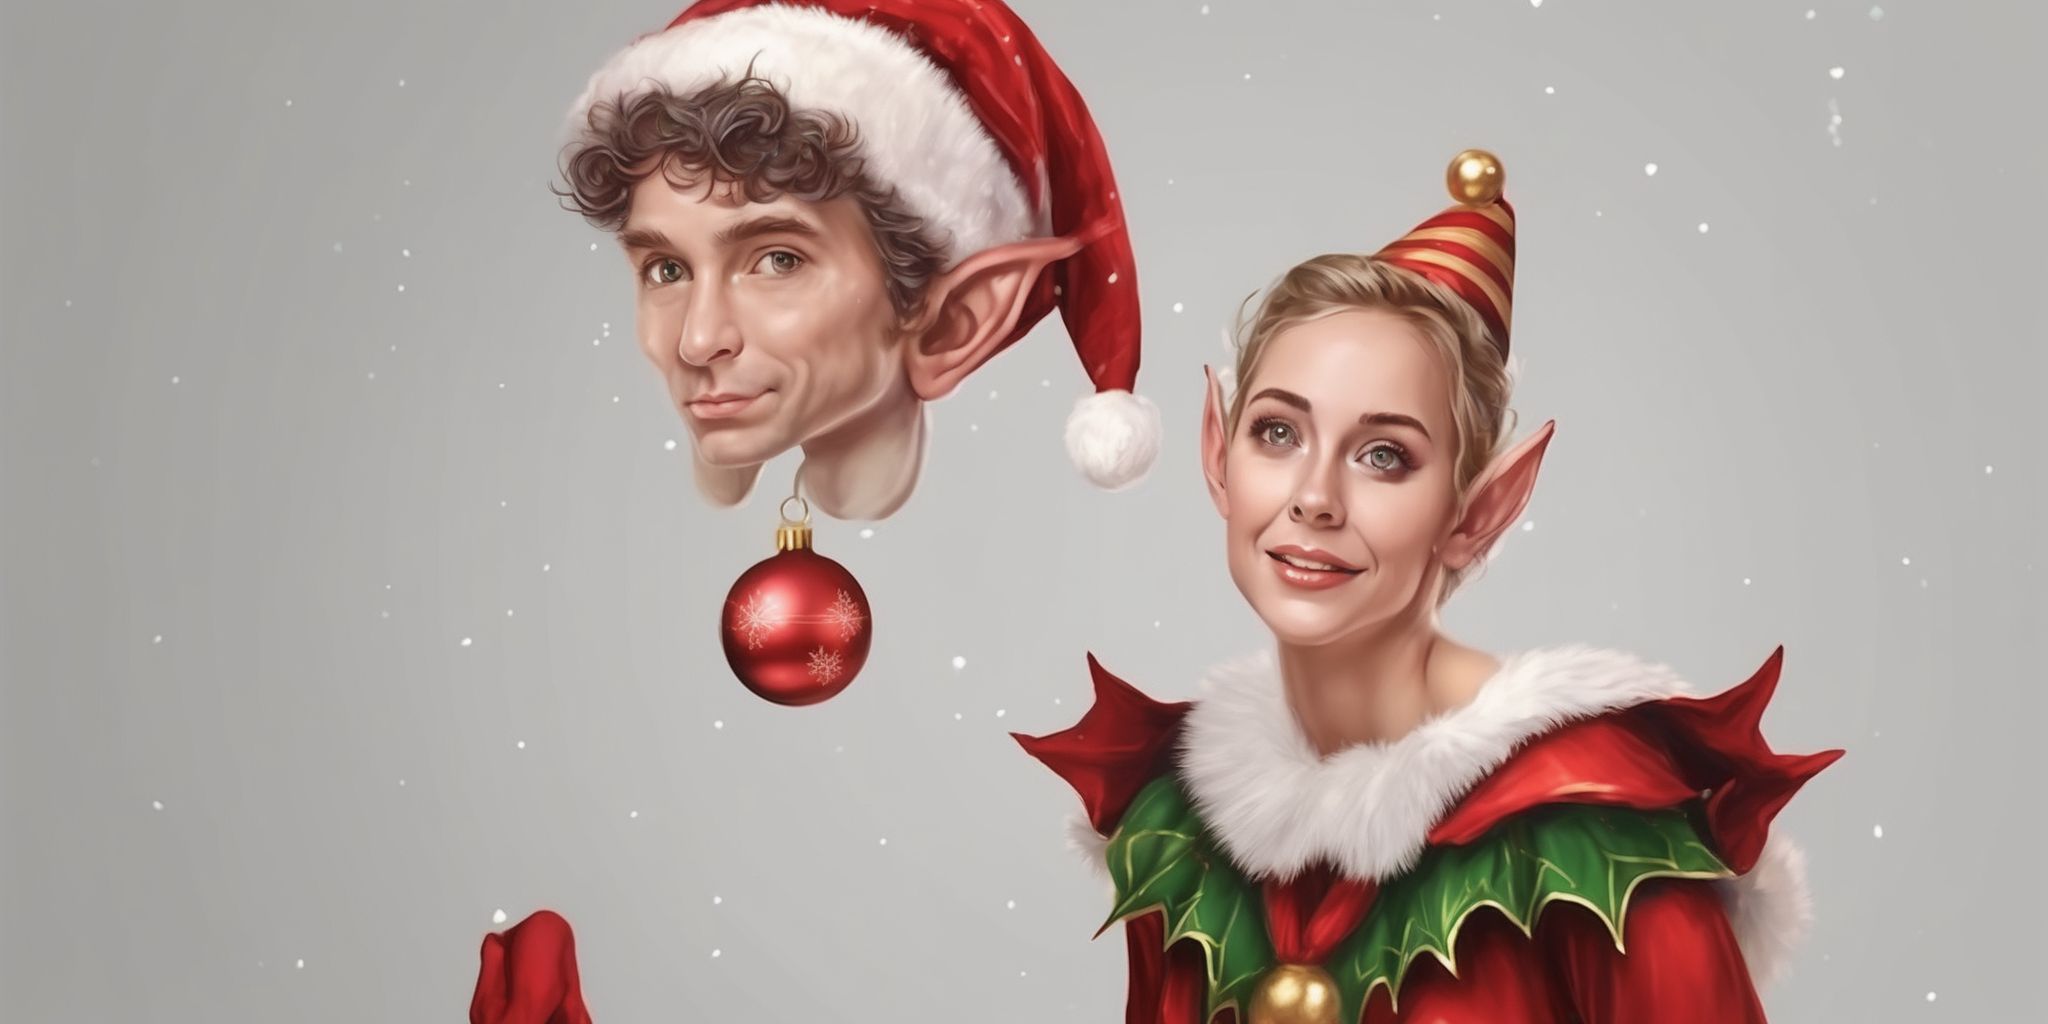 Elf in realistic Christmas style